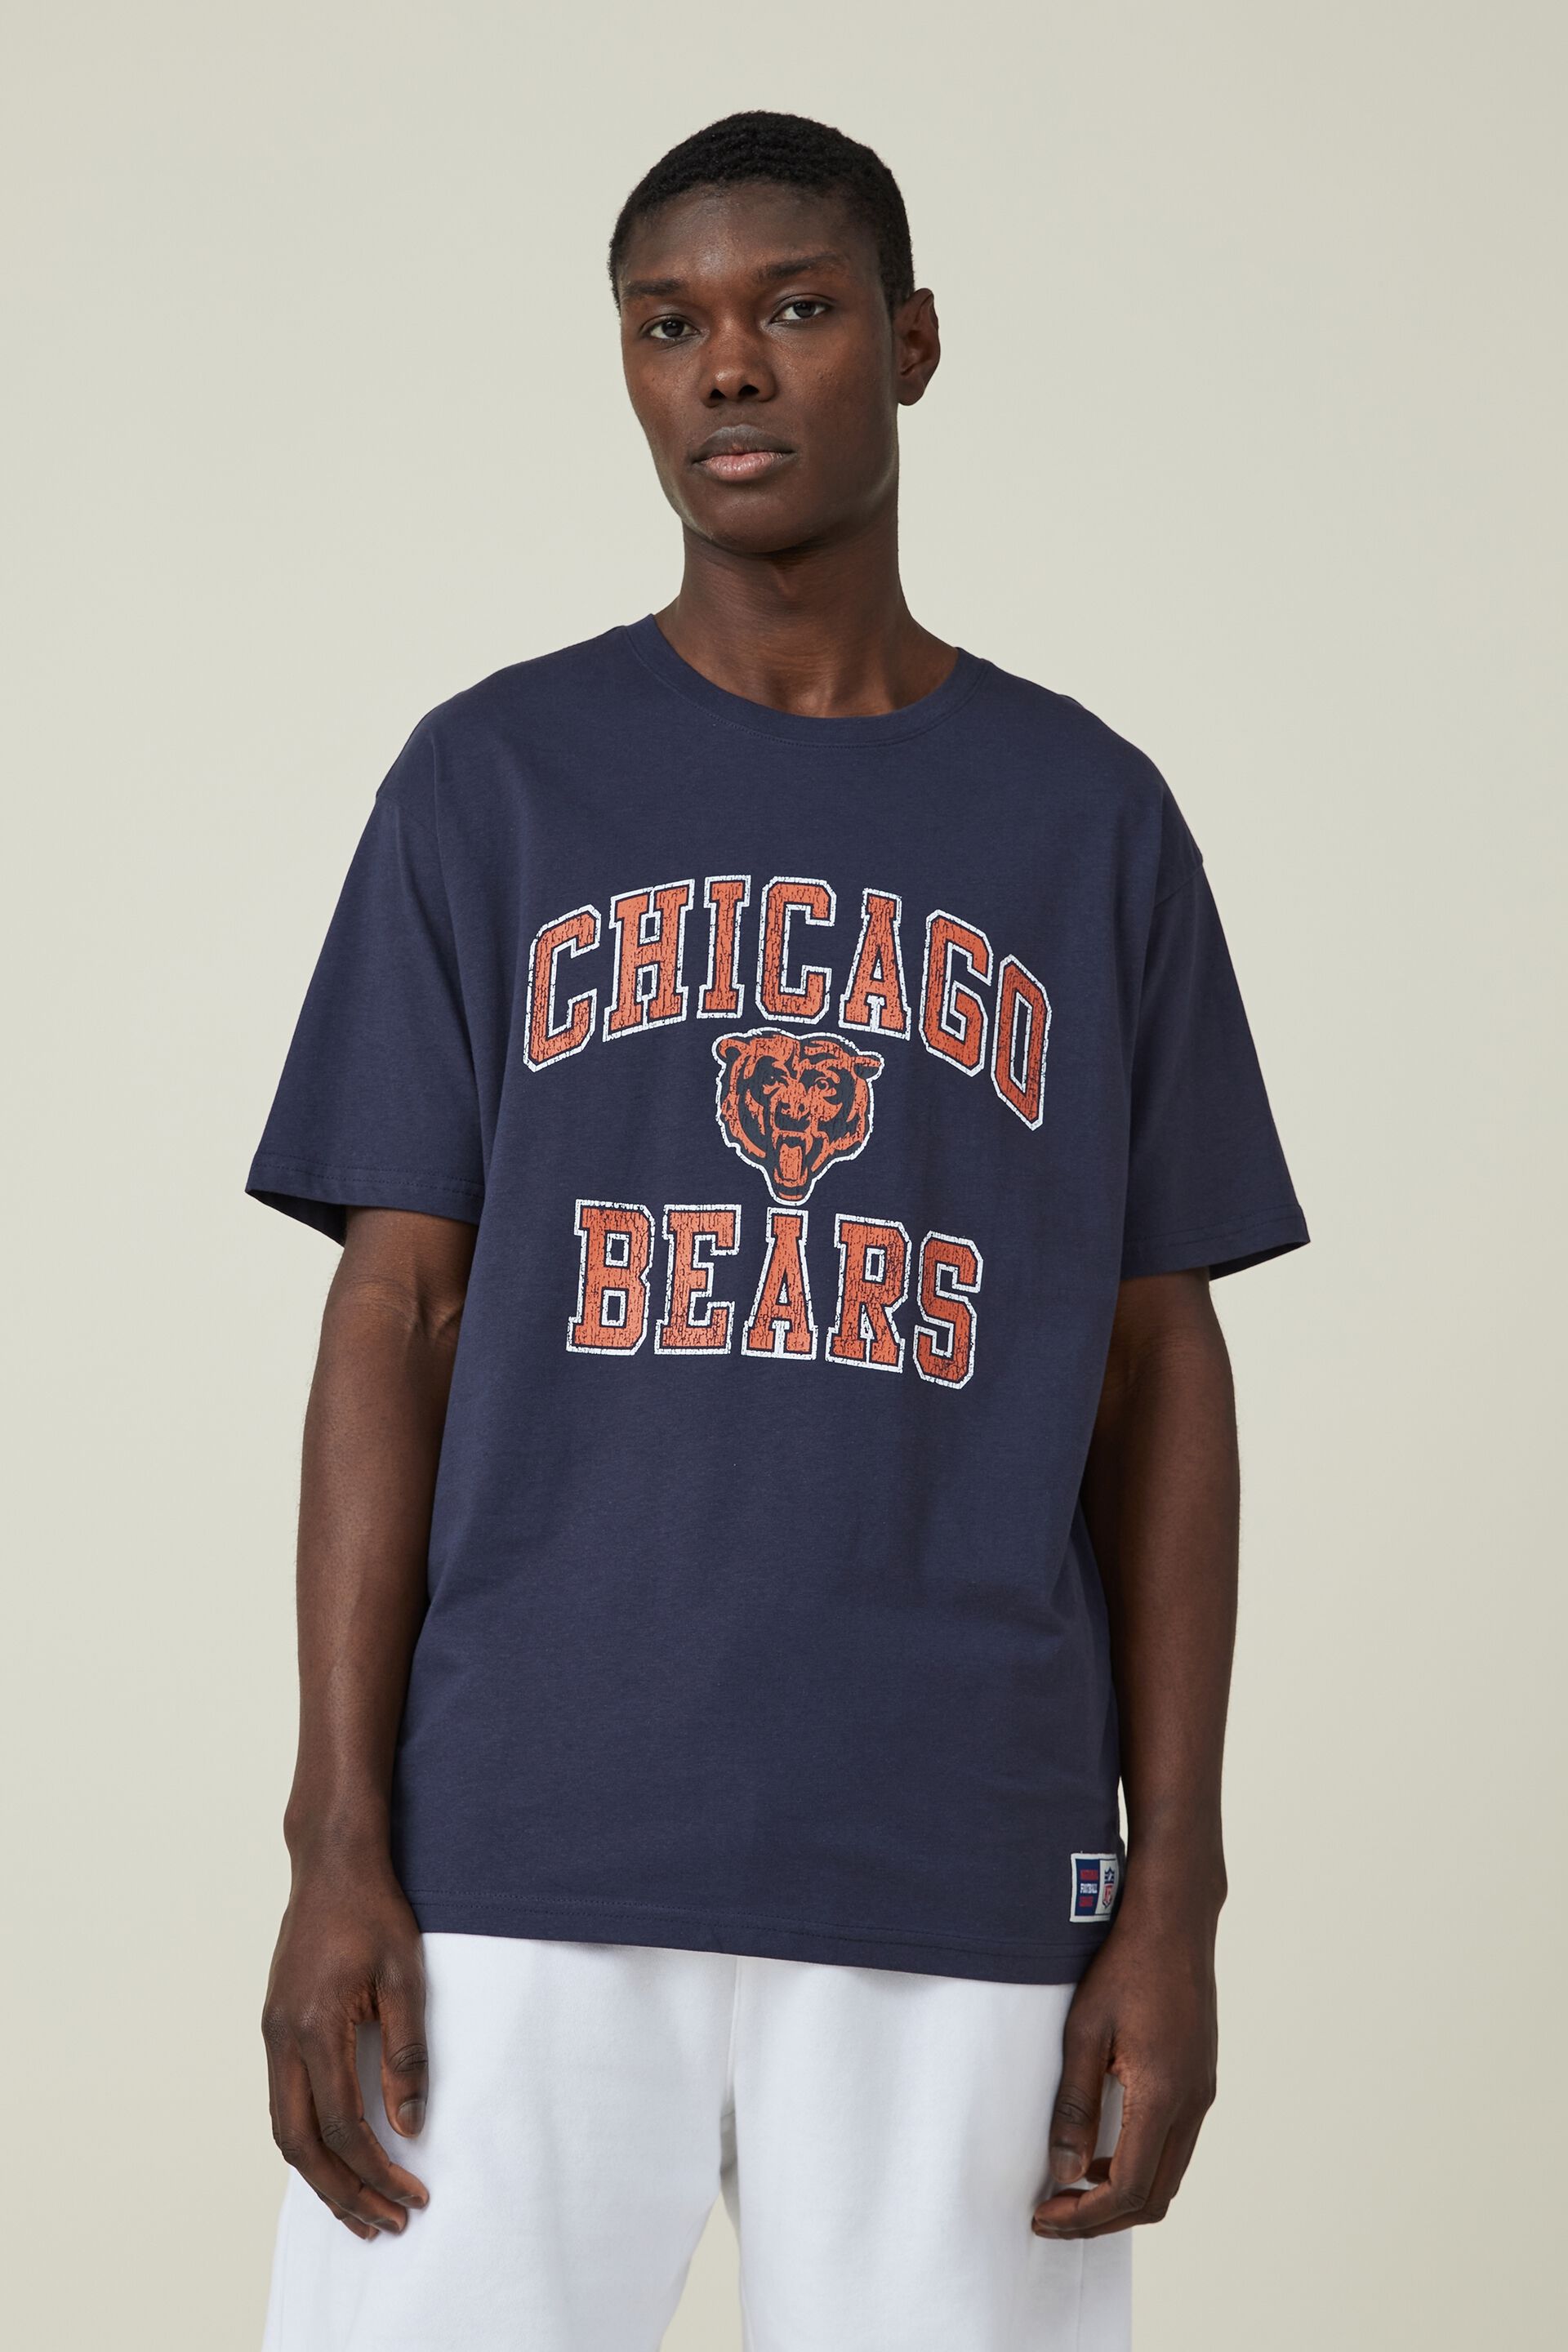 chicago bears shirt old navy